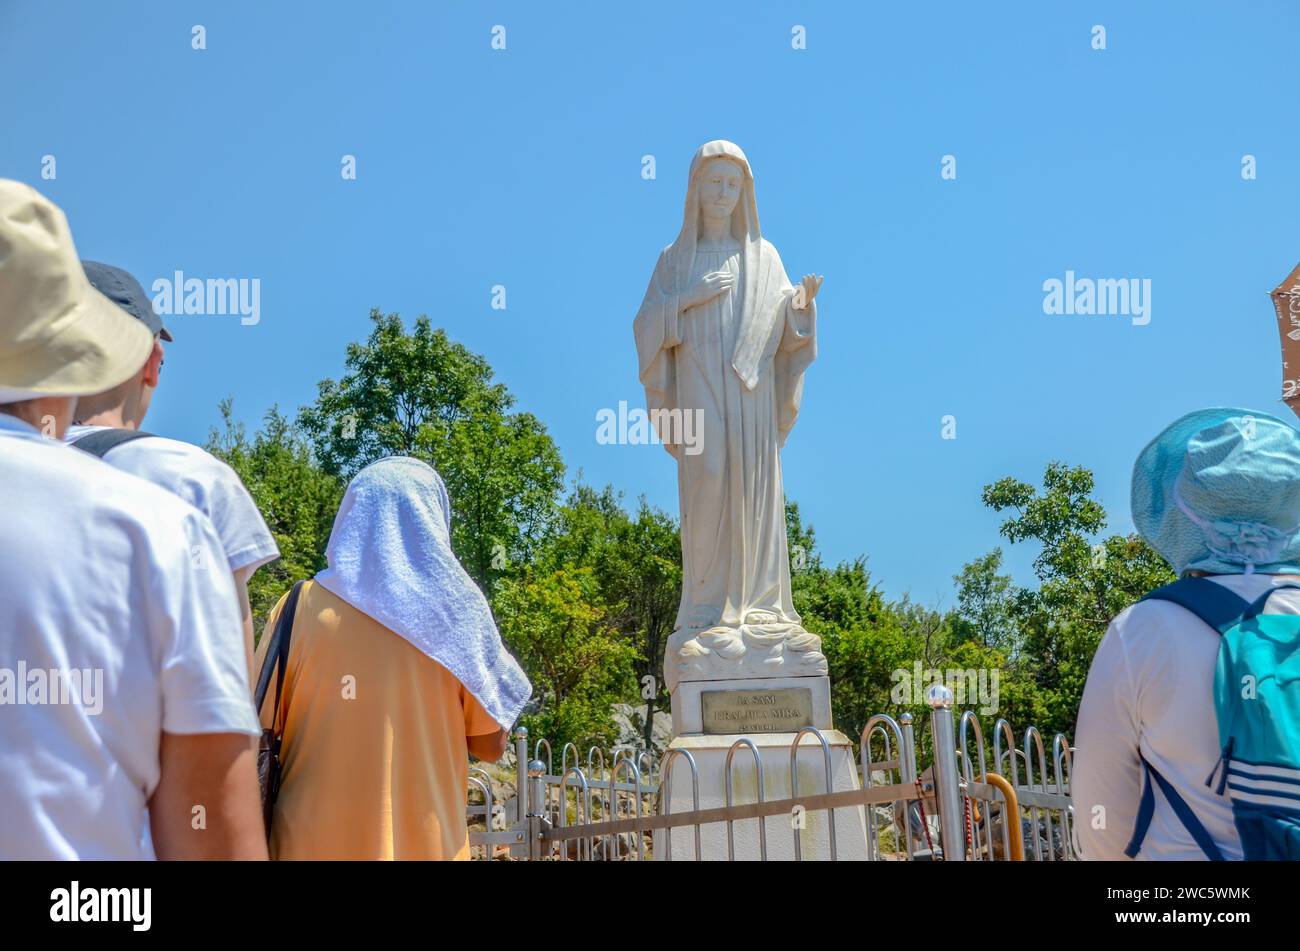 A group of Catholic pilgrims pray at a holy place. Pilgrims in Medjugorje, Bosnia and Herzegovina. Statue of Virgin Mary. Stock Photo